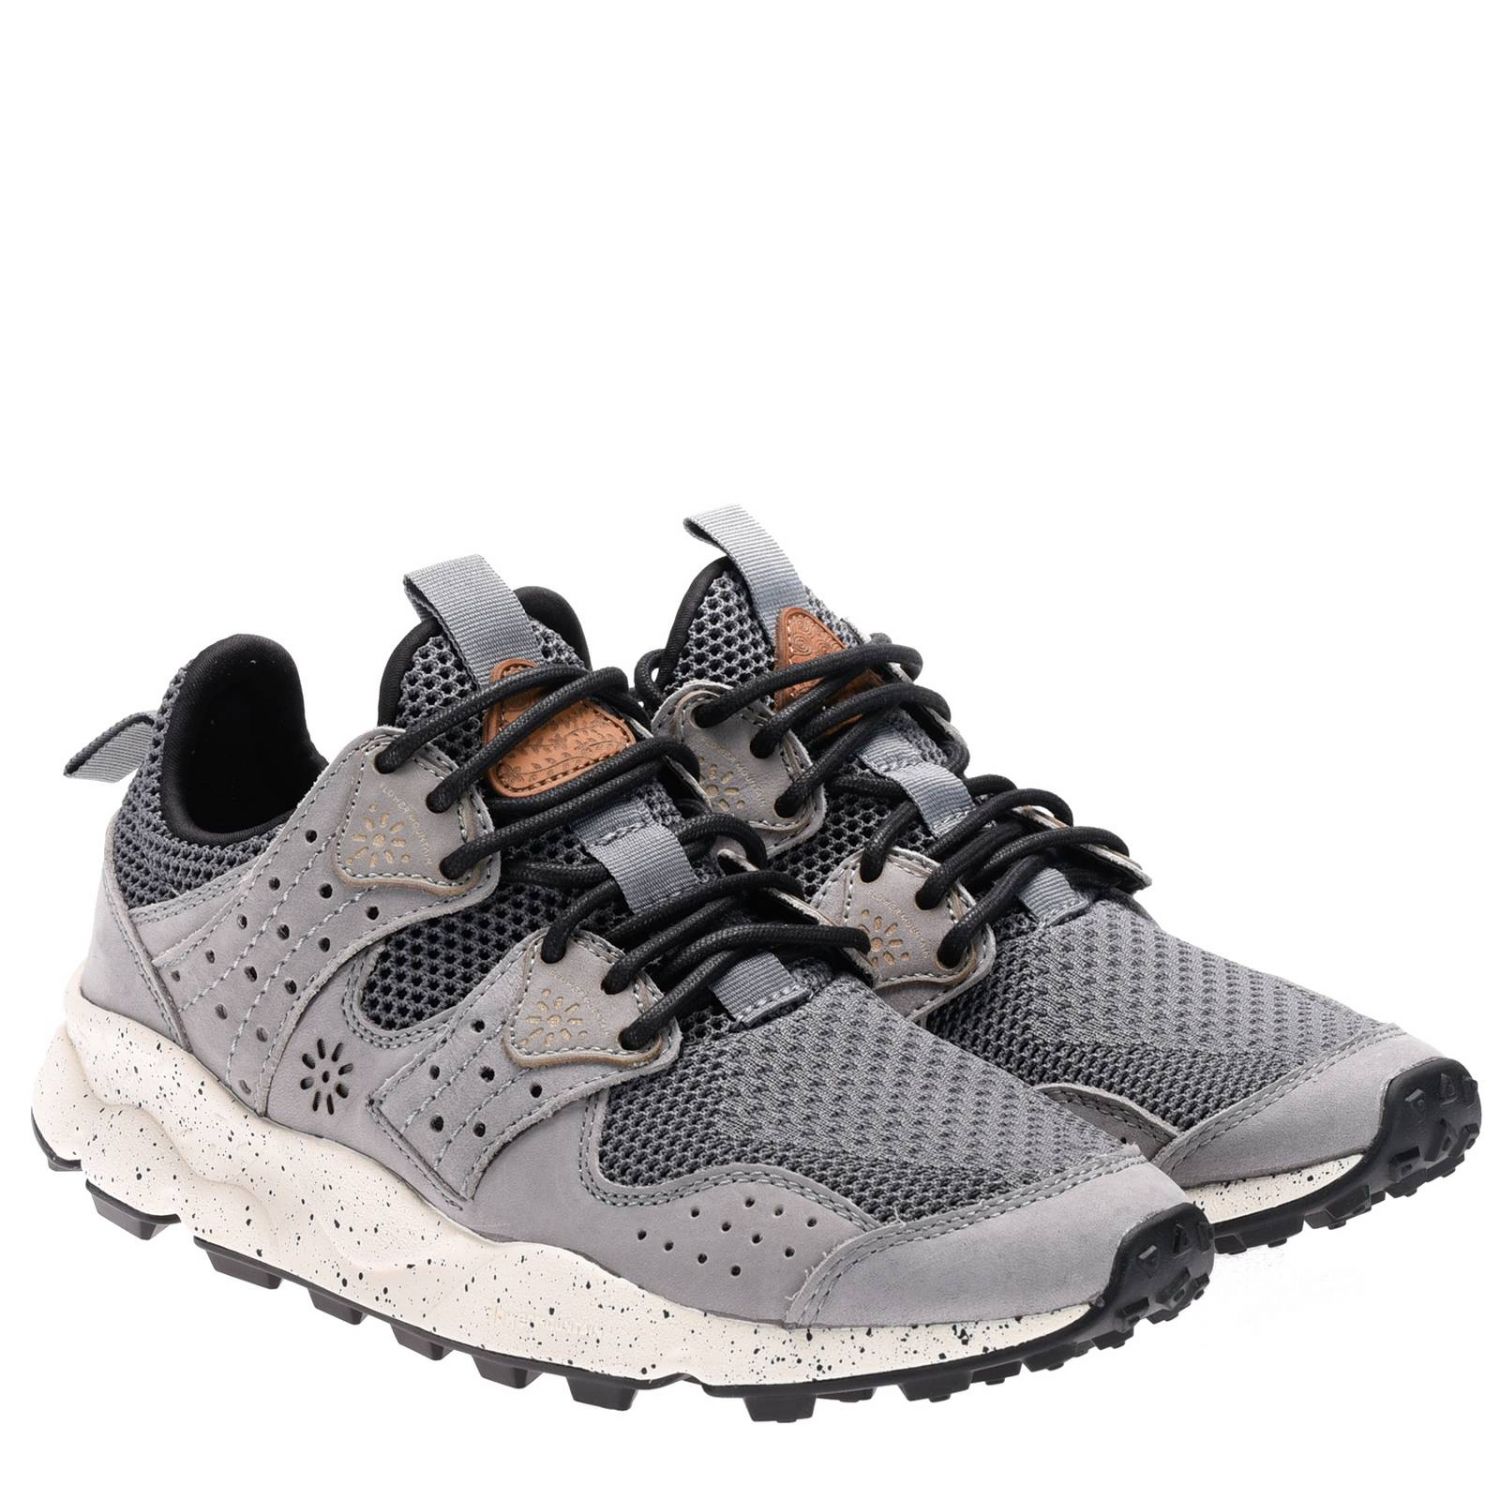 Flower Mountain Outlet Shoes men Shoes Flower Mountain